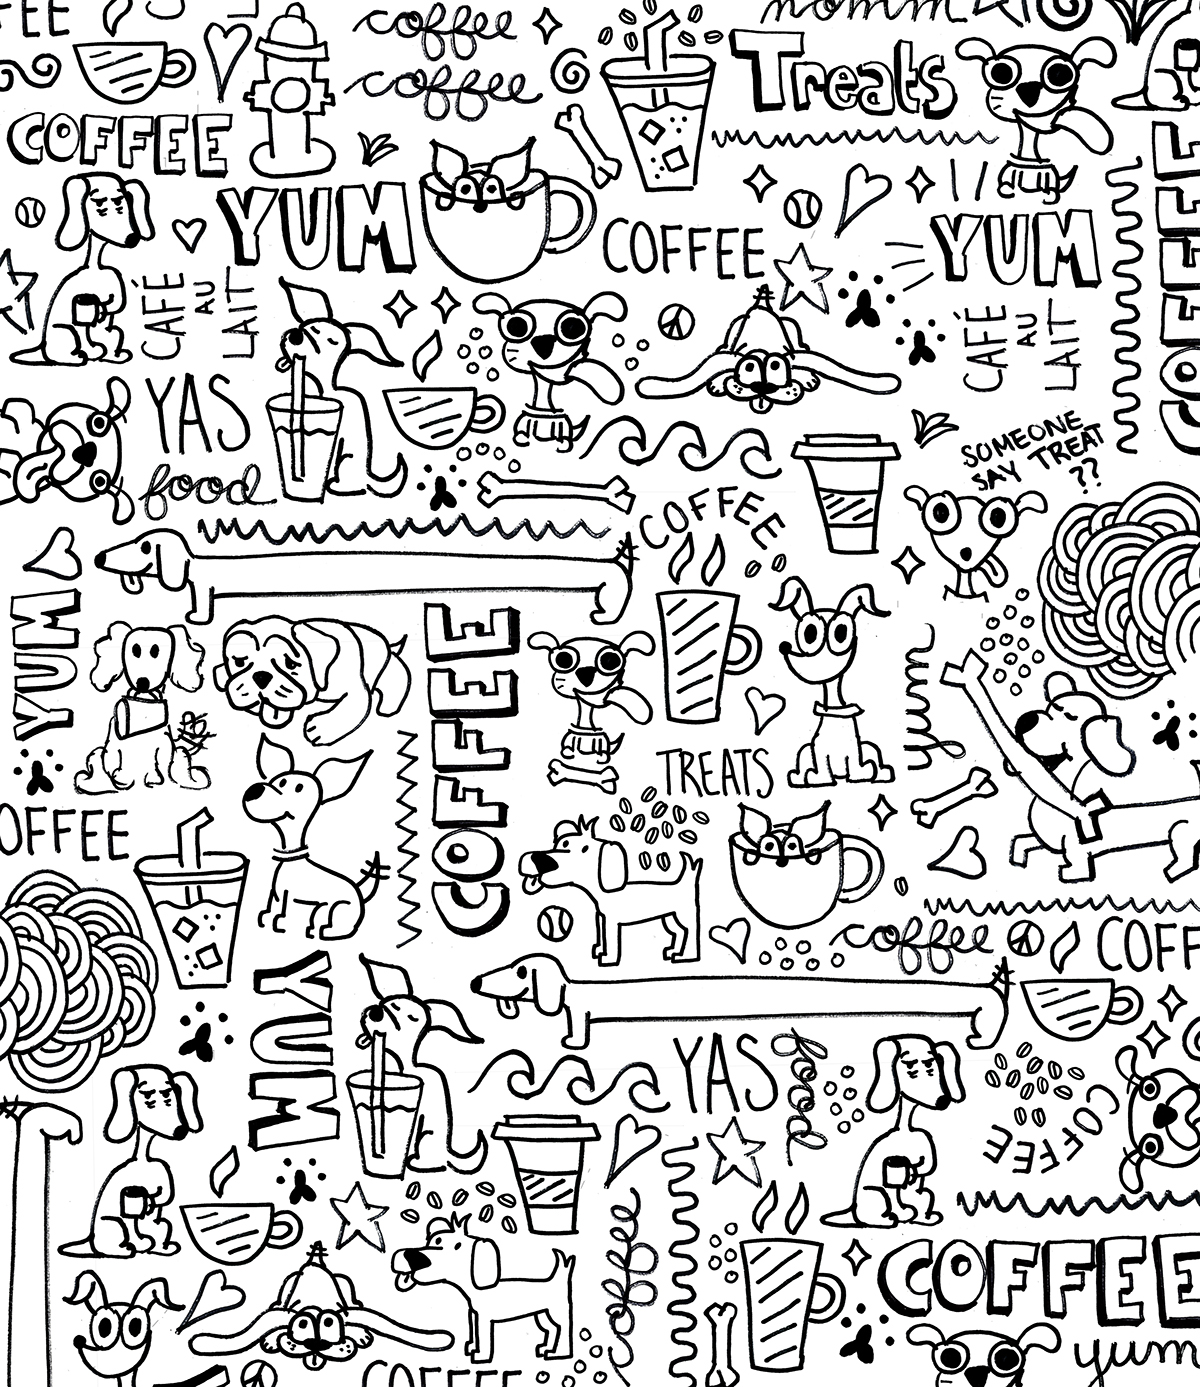 Mutt dog dog cafe puppy cartoon Cartoons drawings cafe restaurant Coffee coffee shop pattern quirky bakery